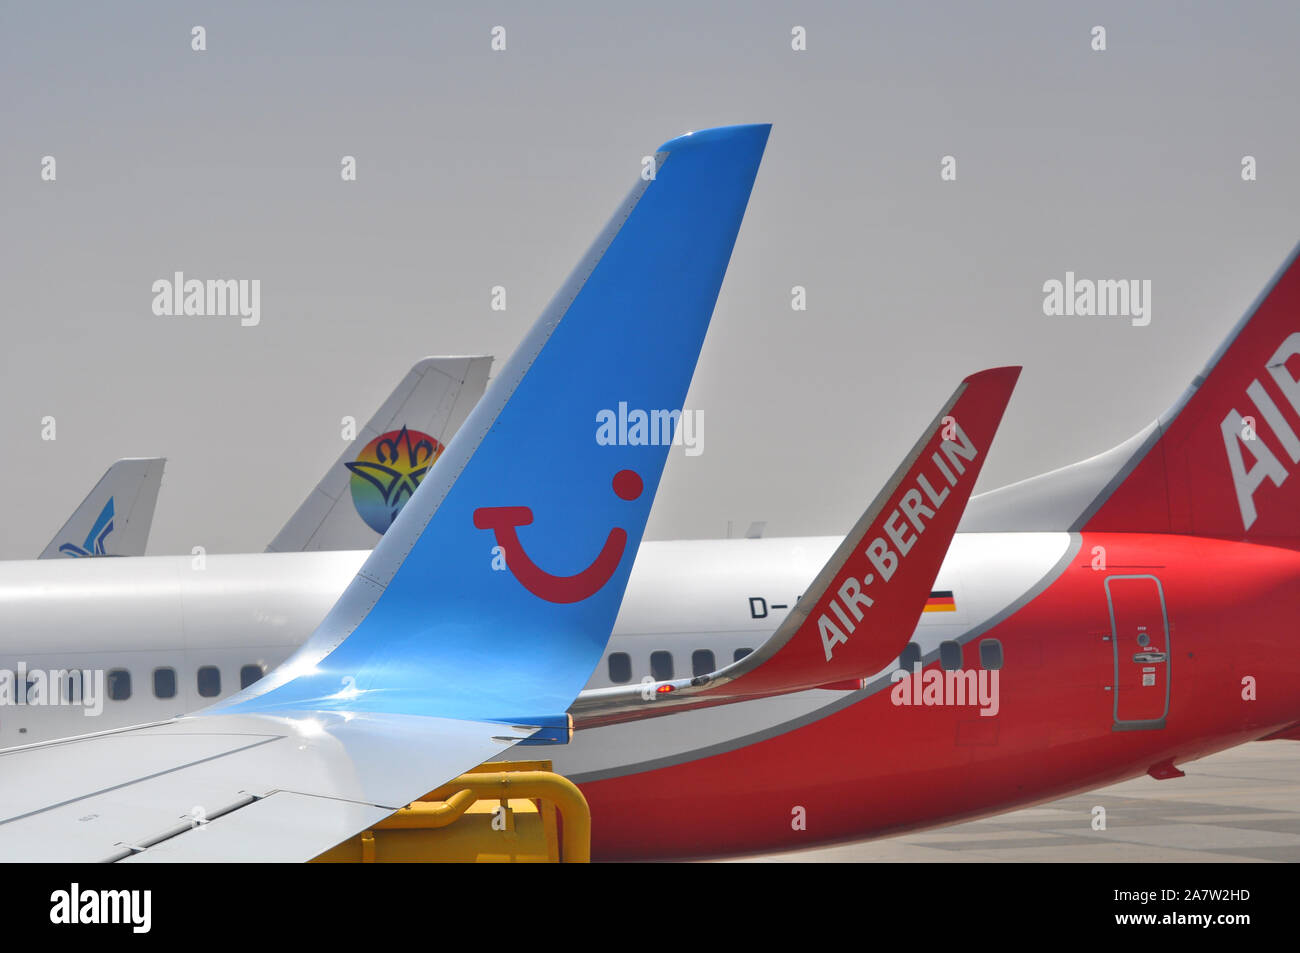 Close up of various tail fins of airliners including Tui and Air Berlin. Stock Photo